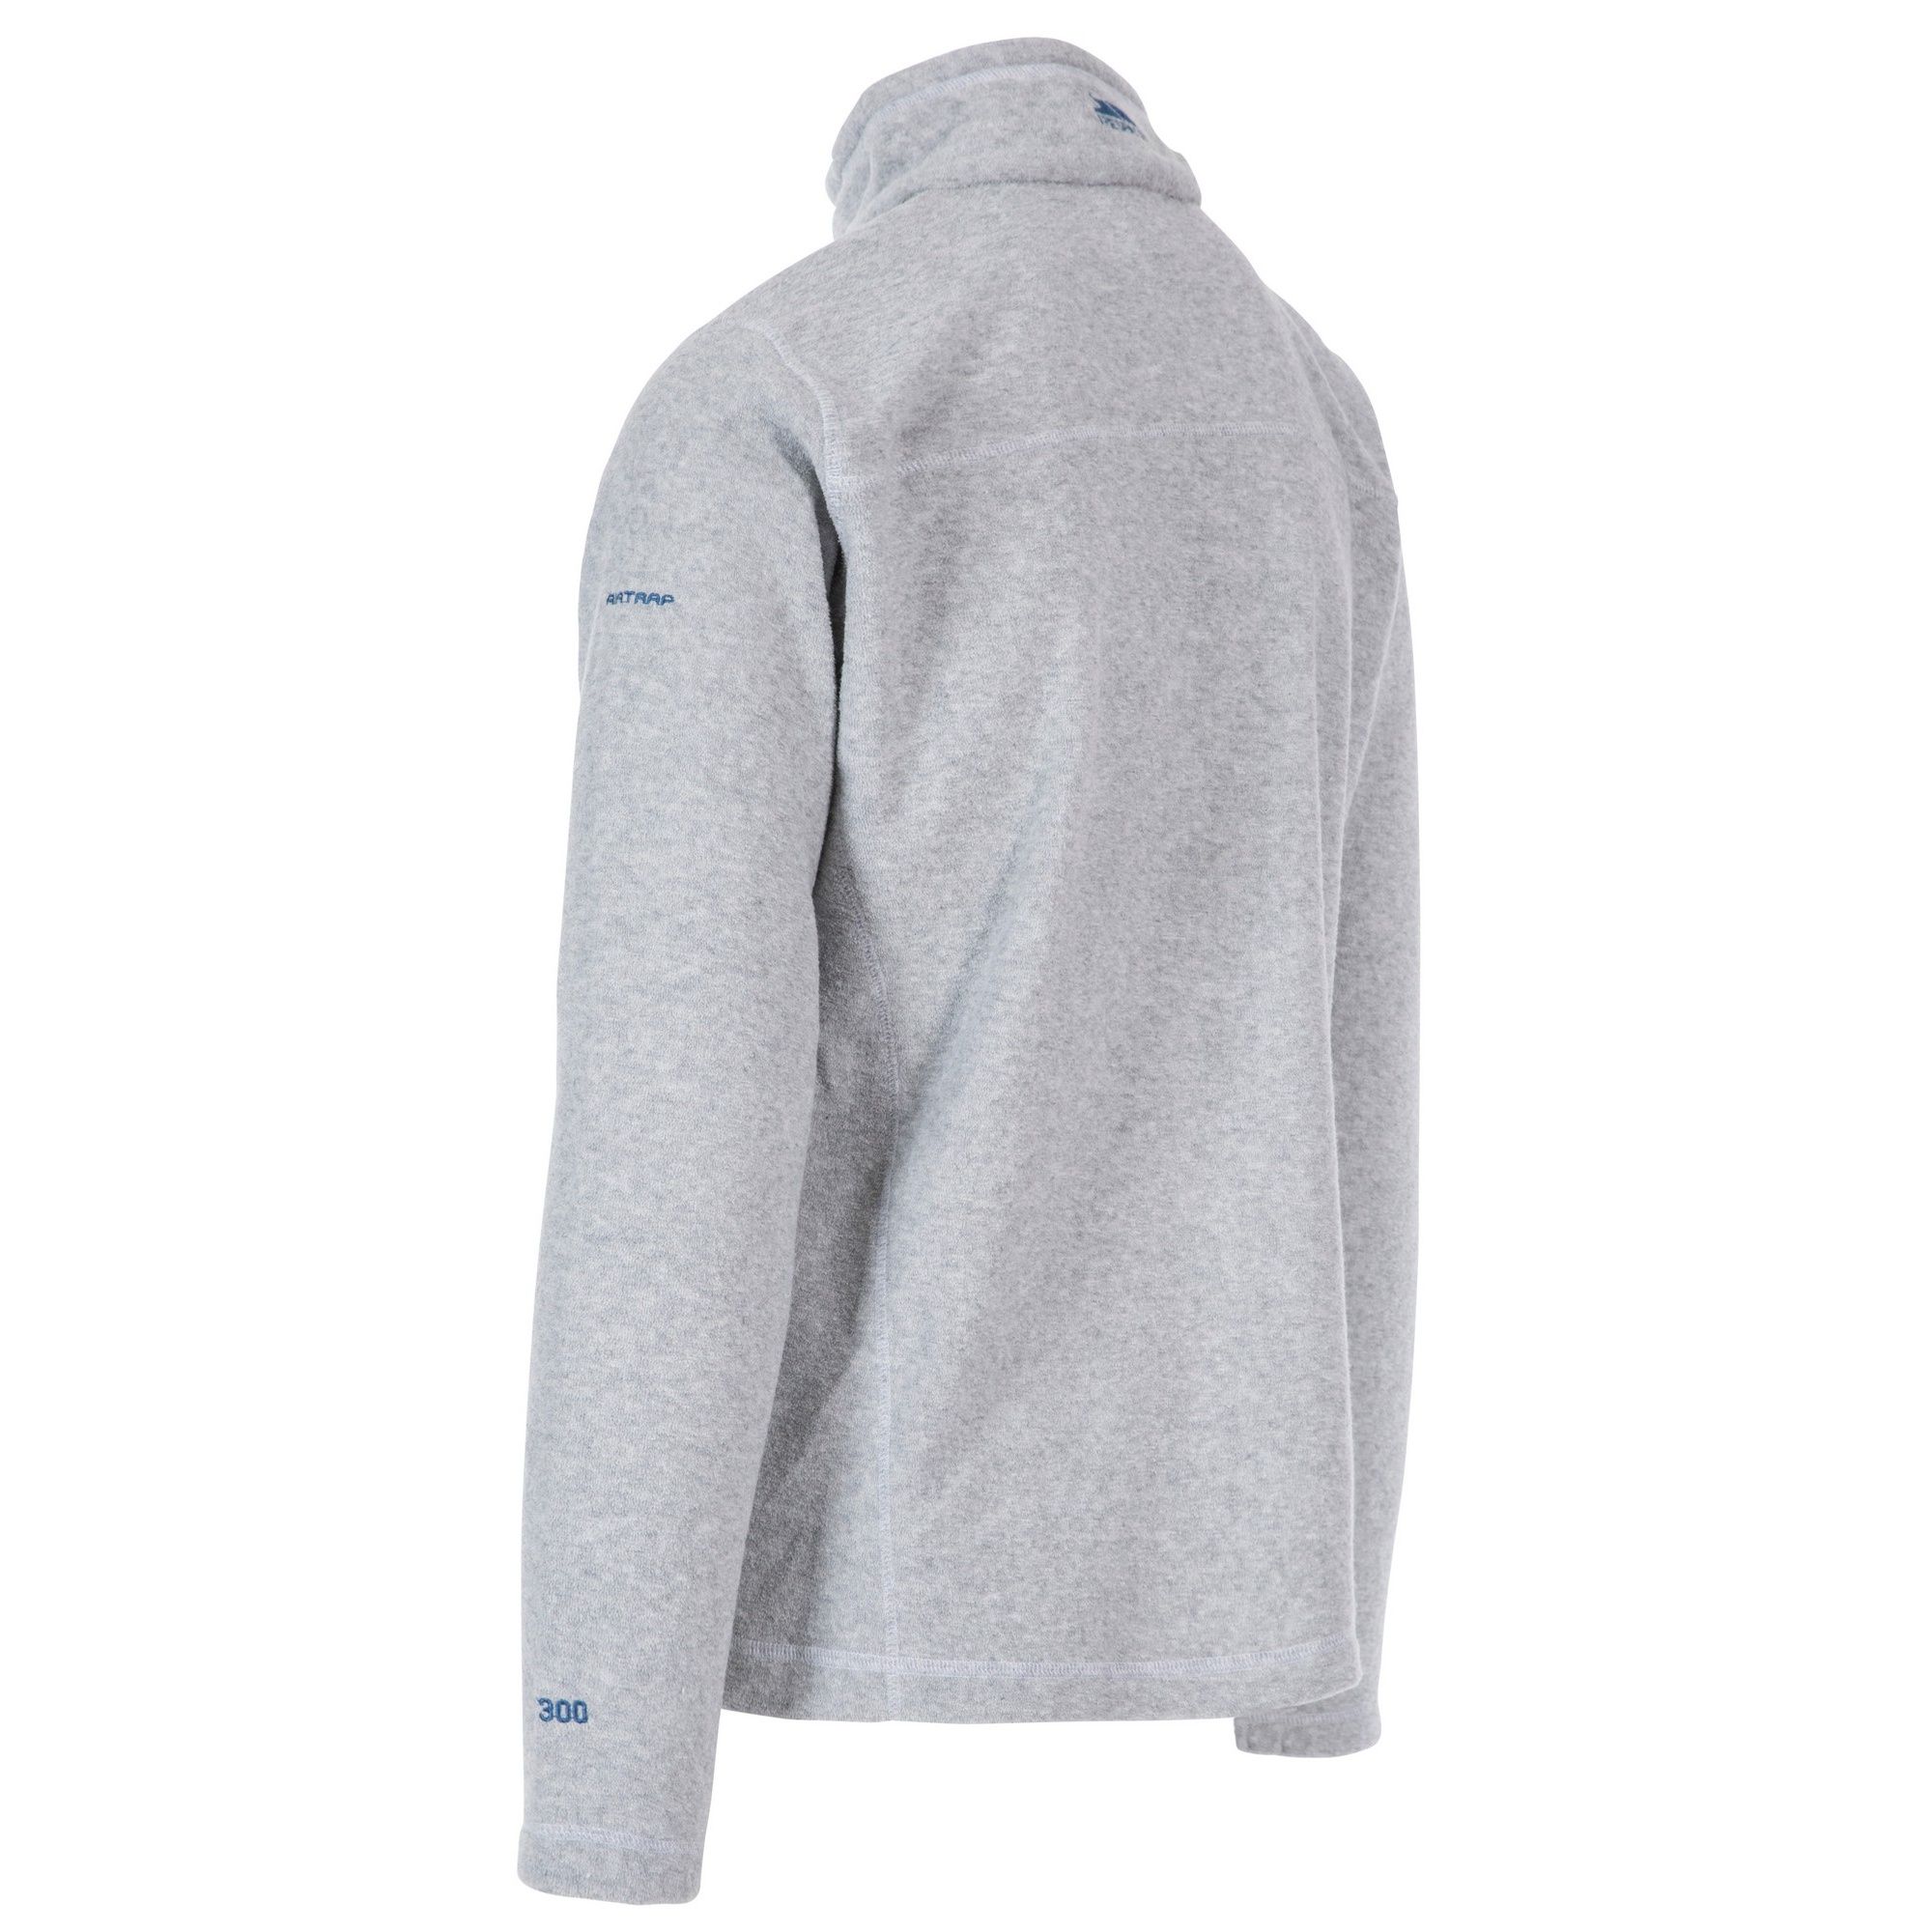 Towelling fleece with brushed back. 1/2 zip neck. Low profile zip. Coverstitch detail. Airtrap. 280gsm. 100% Polyester. Trespass Mens Chest Sizing (approx): S - 35-37in/89-94cm, M - 38-40in/96.5-101.5cm, L - 41-43in/104-109cm, XL - 44-46in/111.5-117cm, XXL - 46-48in/117-122cm, 3XL - 48-50in/122-127cm.p. Coverstitch detail. Airtrap. 280gsm. 100% Polyester.